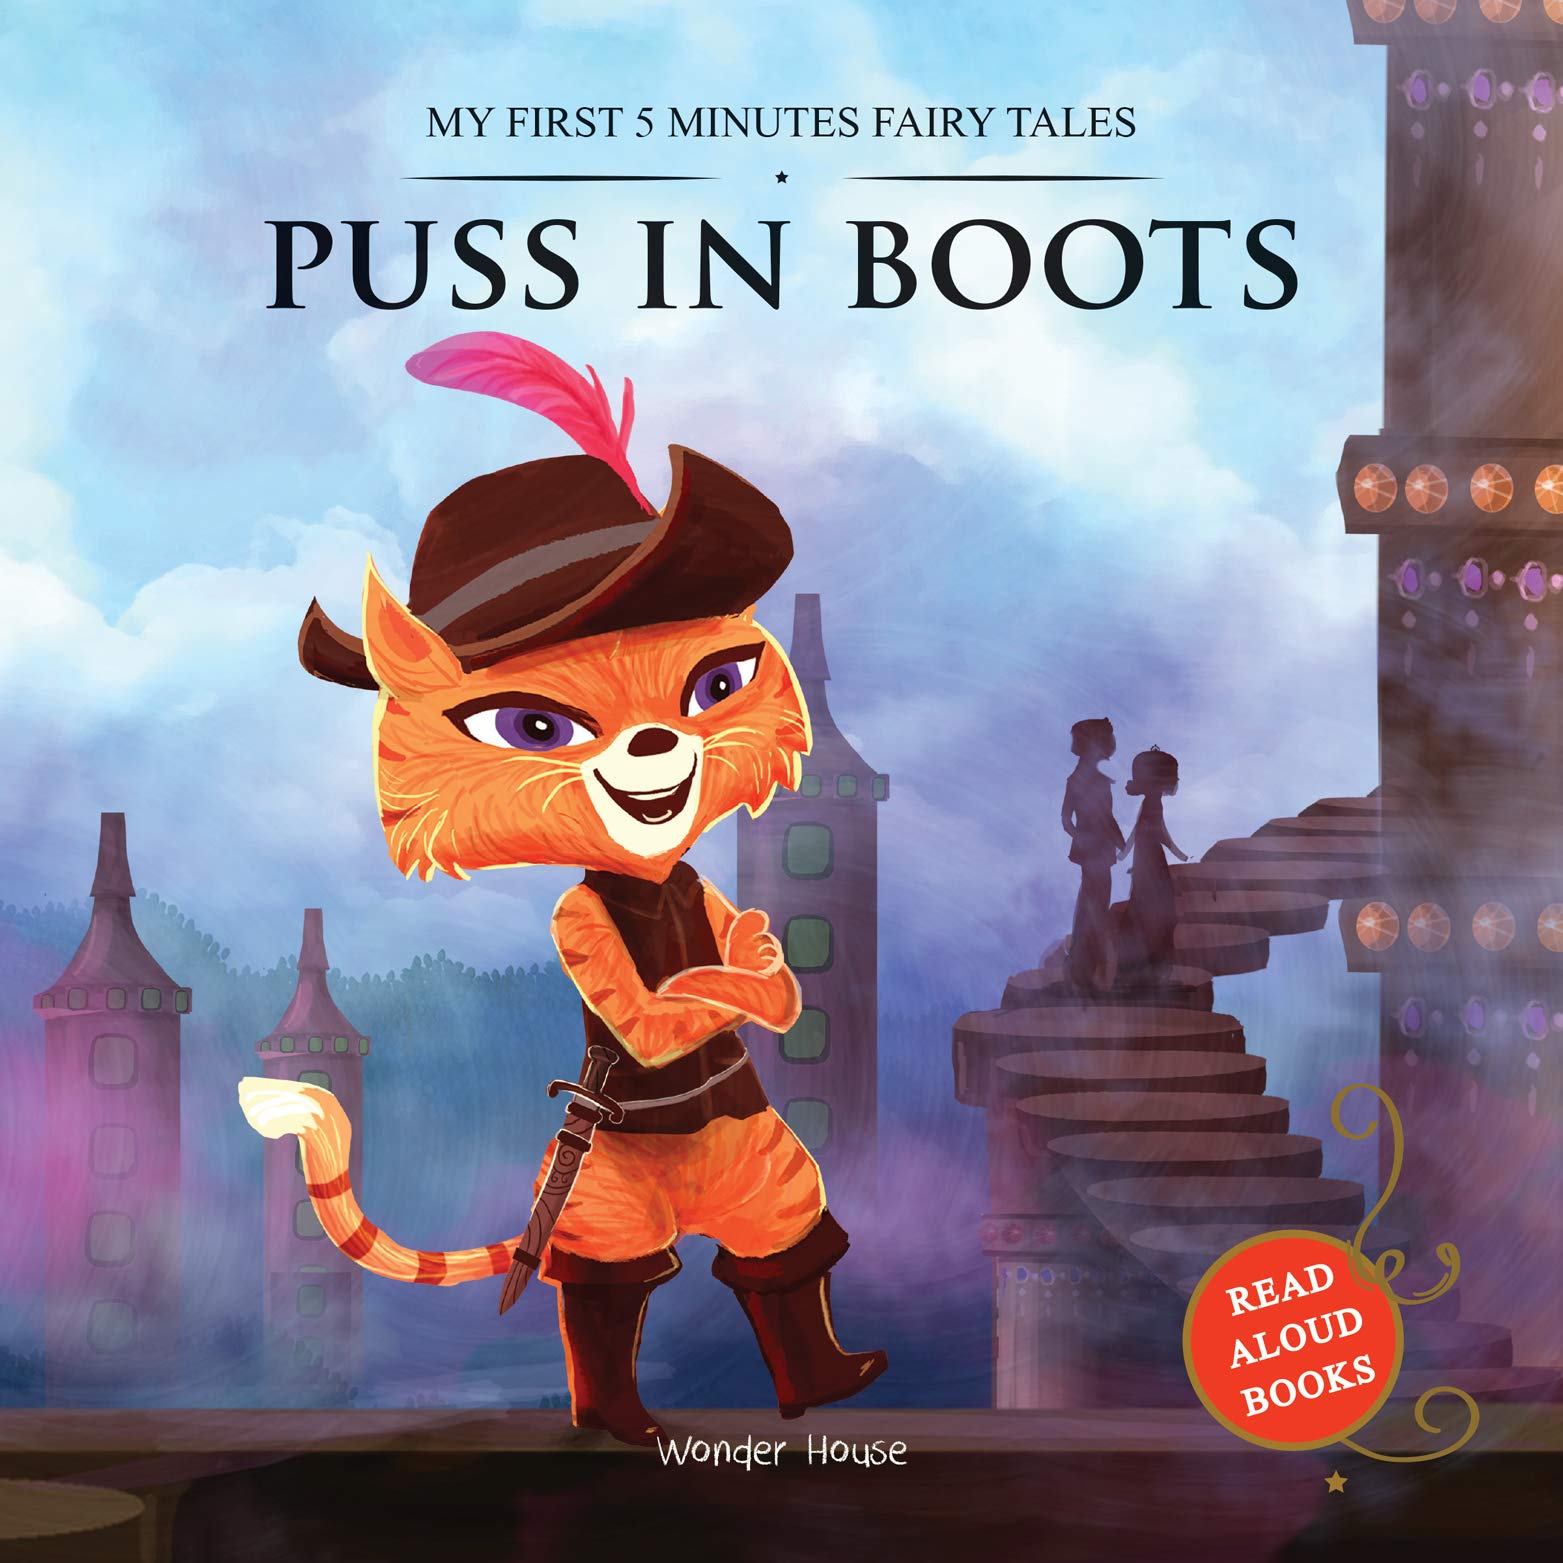 My First 5 Minutes Fairy Tales: Puss in Boots